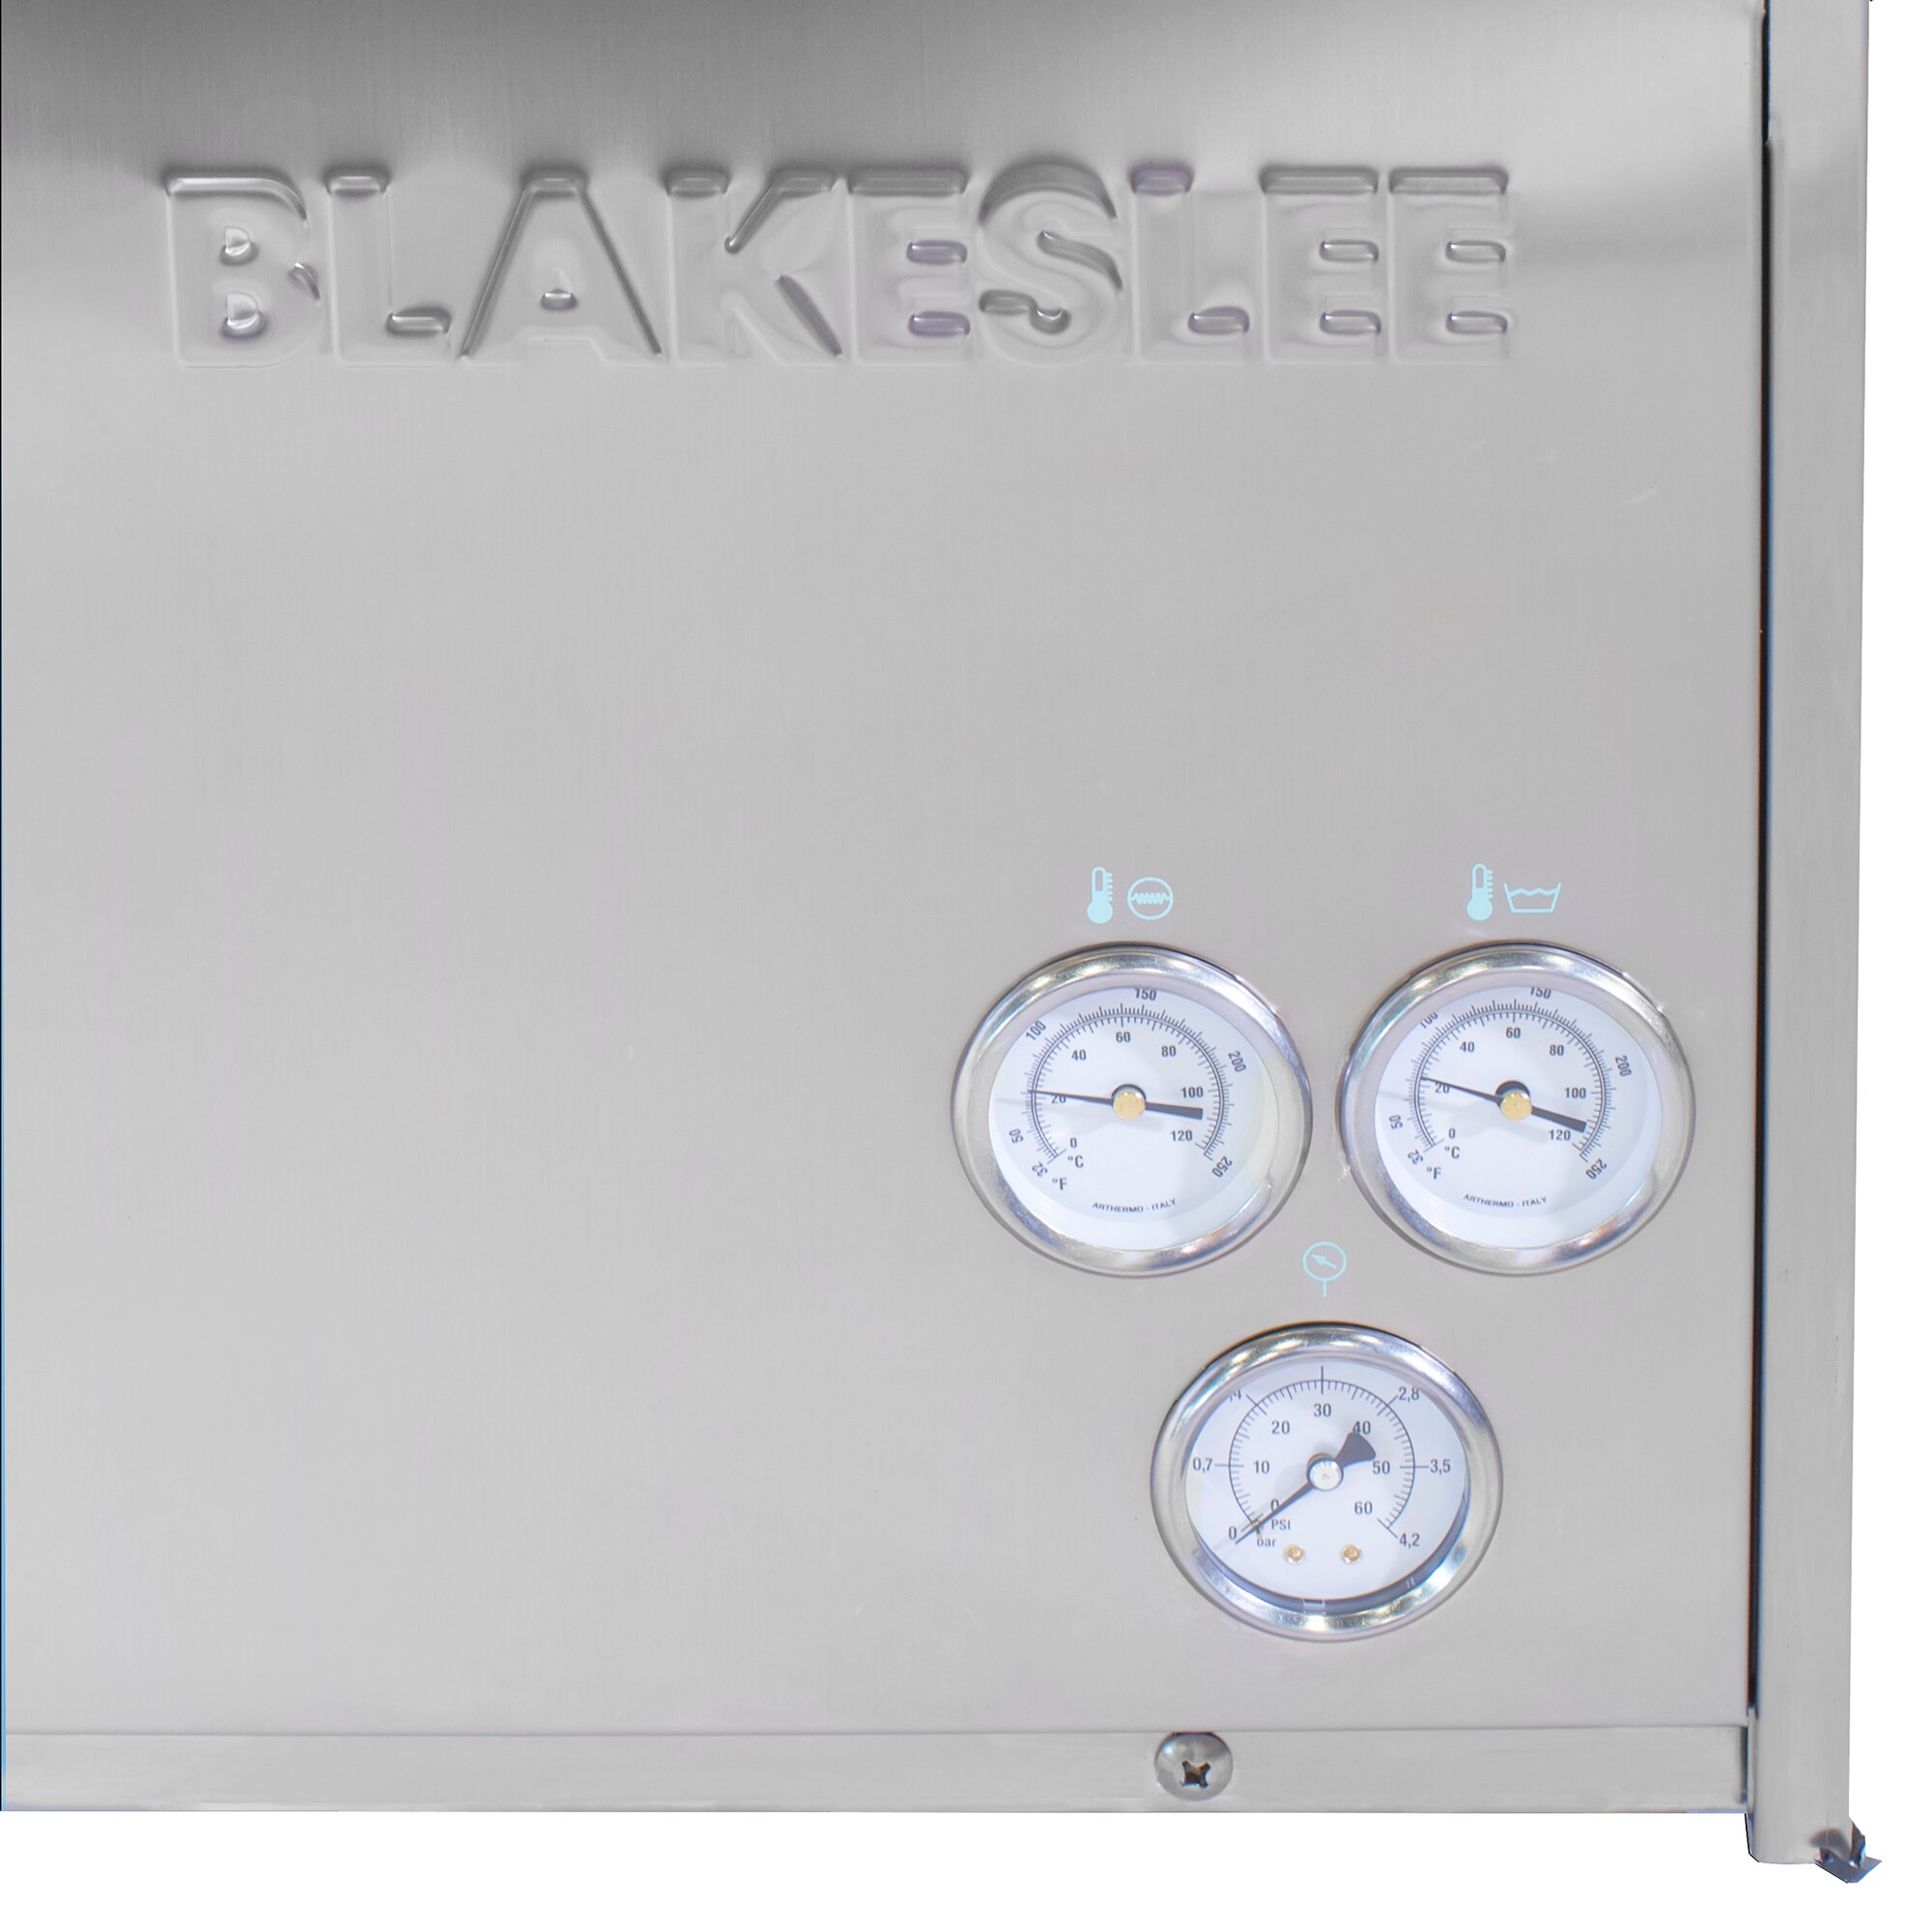 BLAKESLEE 30-Racks per Hour Stainless Undercounter Commercial Dishwasher